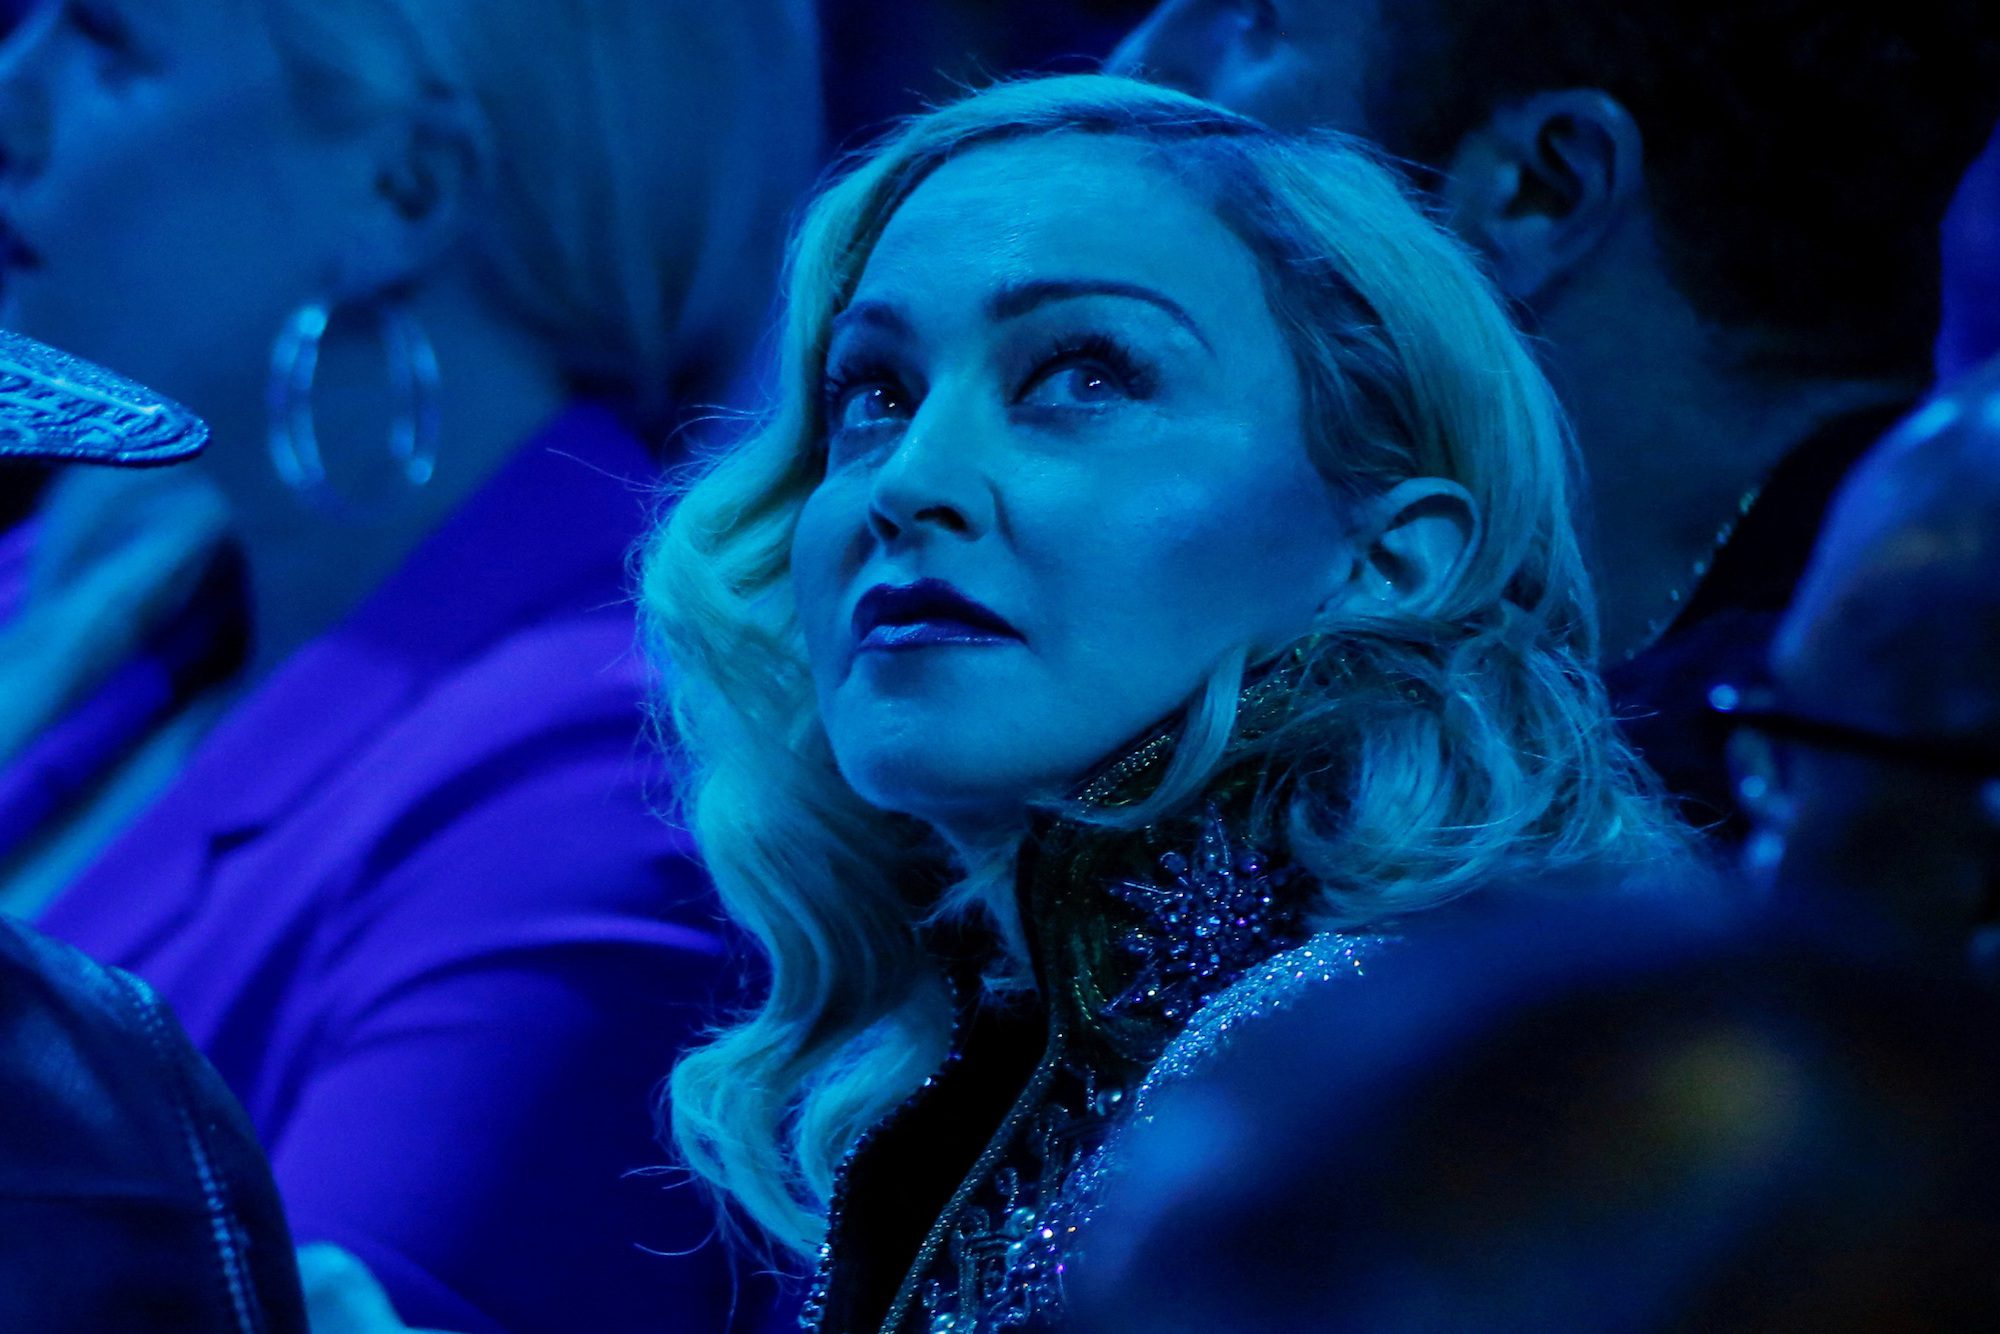 Singer Madonna attends the 30th annual GLAAD awards ceremony in New York City, New York, U.S., May 4, 2019. REUTERS/Eduardo Munoz